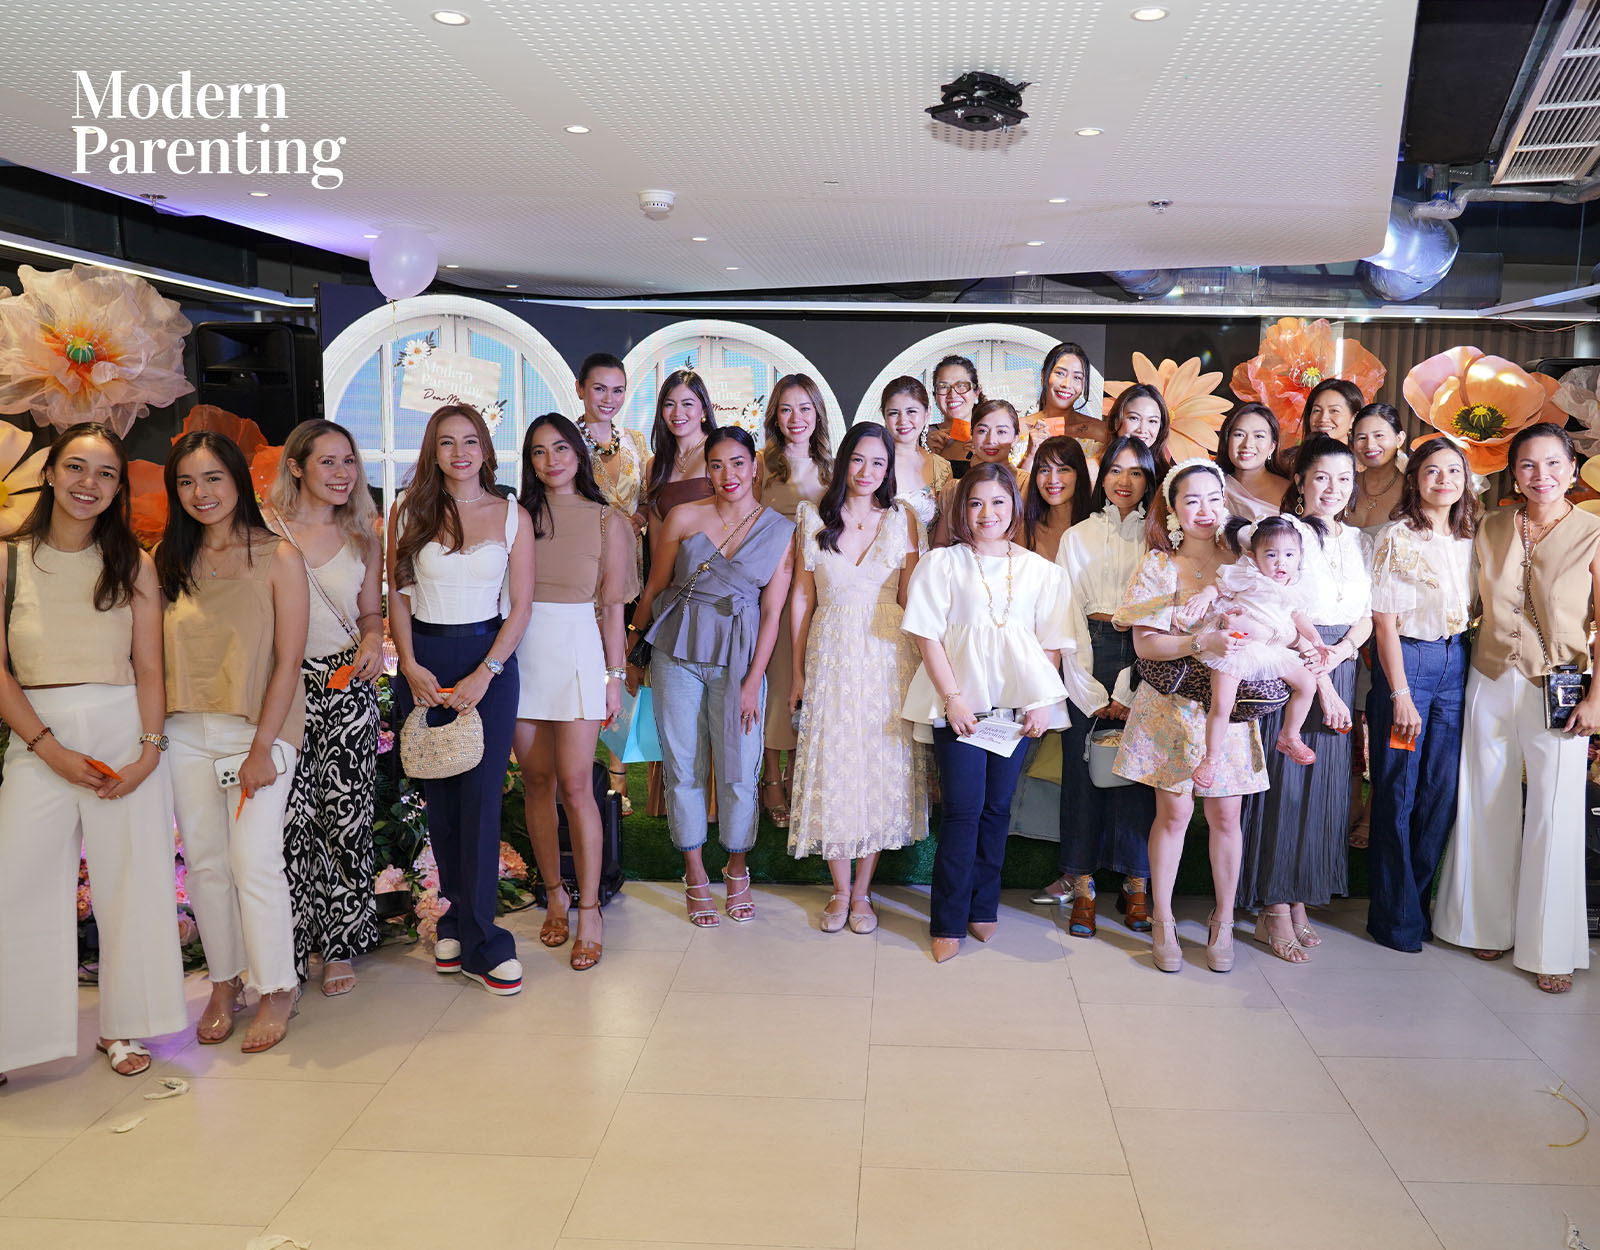 Moms who graced the Modern Parenting Dear Mama event